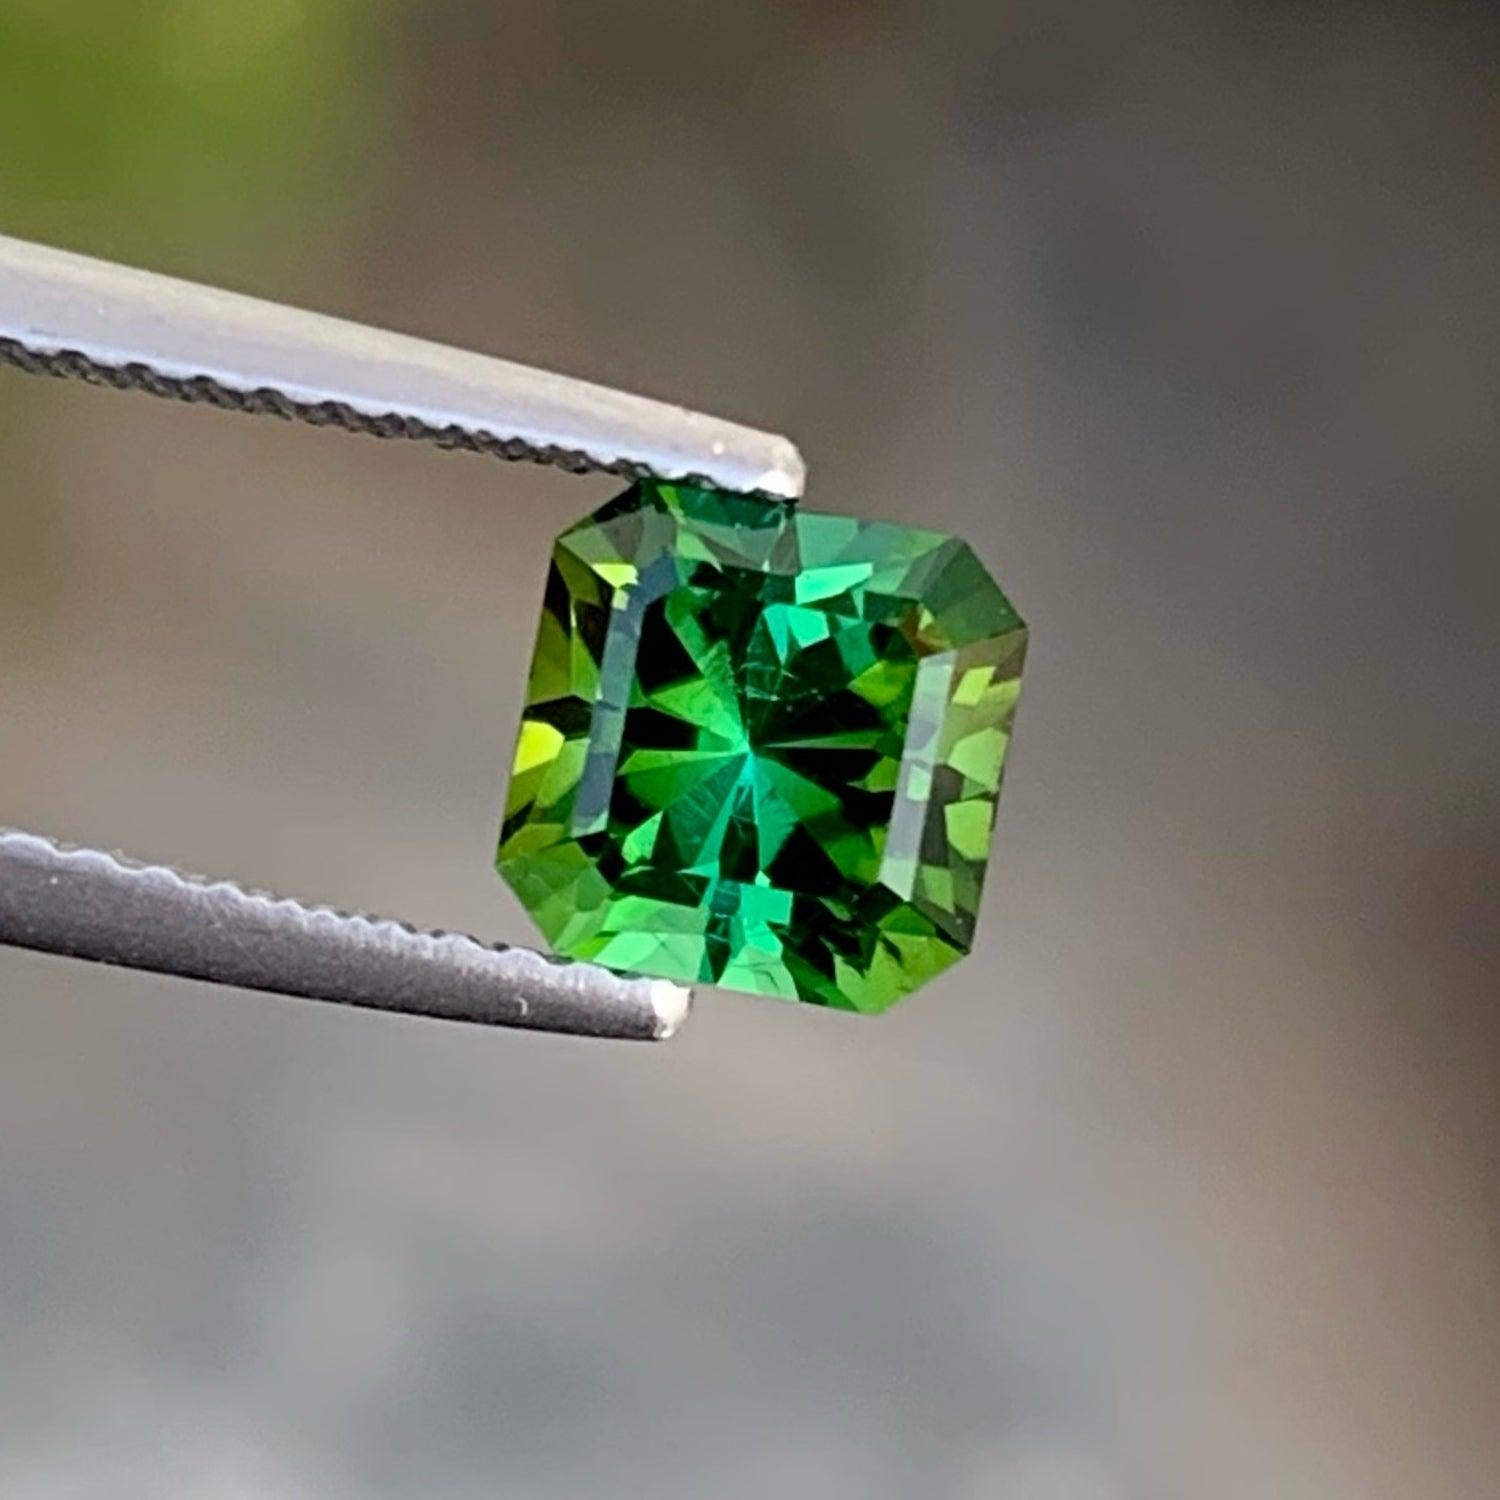 Octagon Cut Fantasy Bluish Green Tourmaline Gemstone 1.40 CTS Afghan Tourmaline For Jewelry For Sale